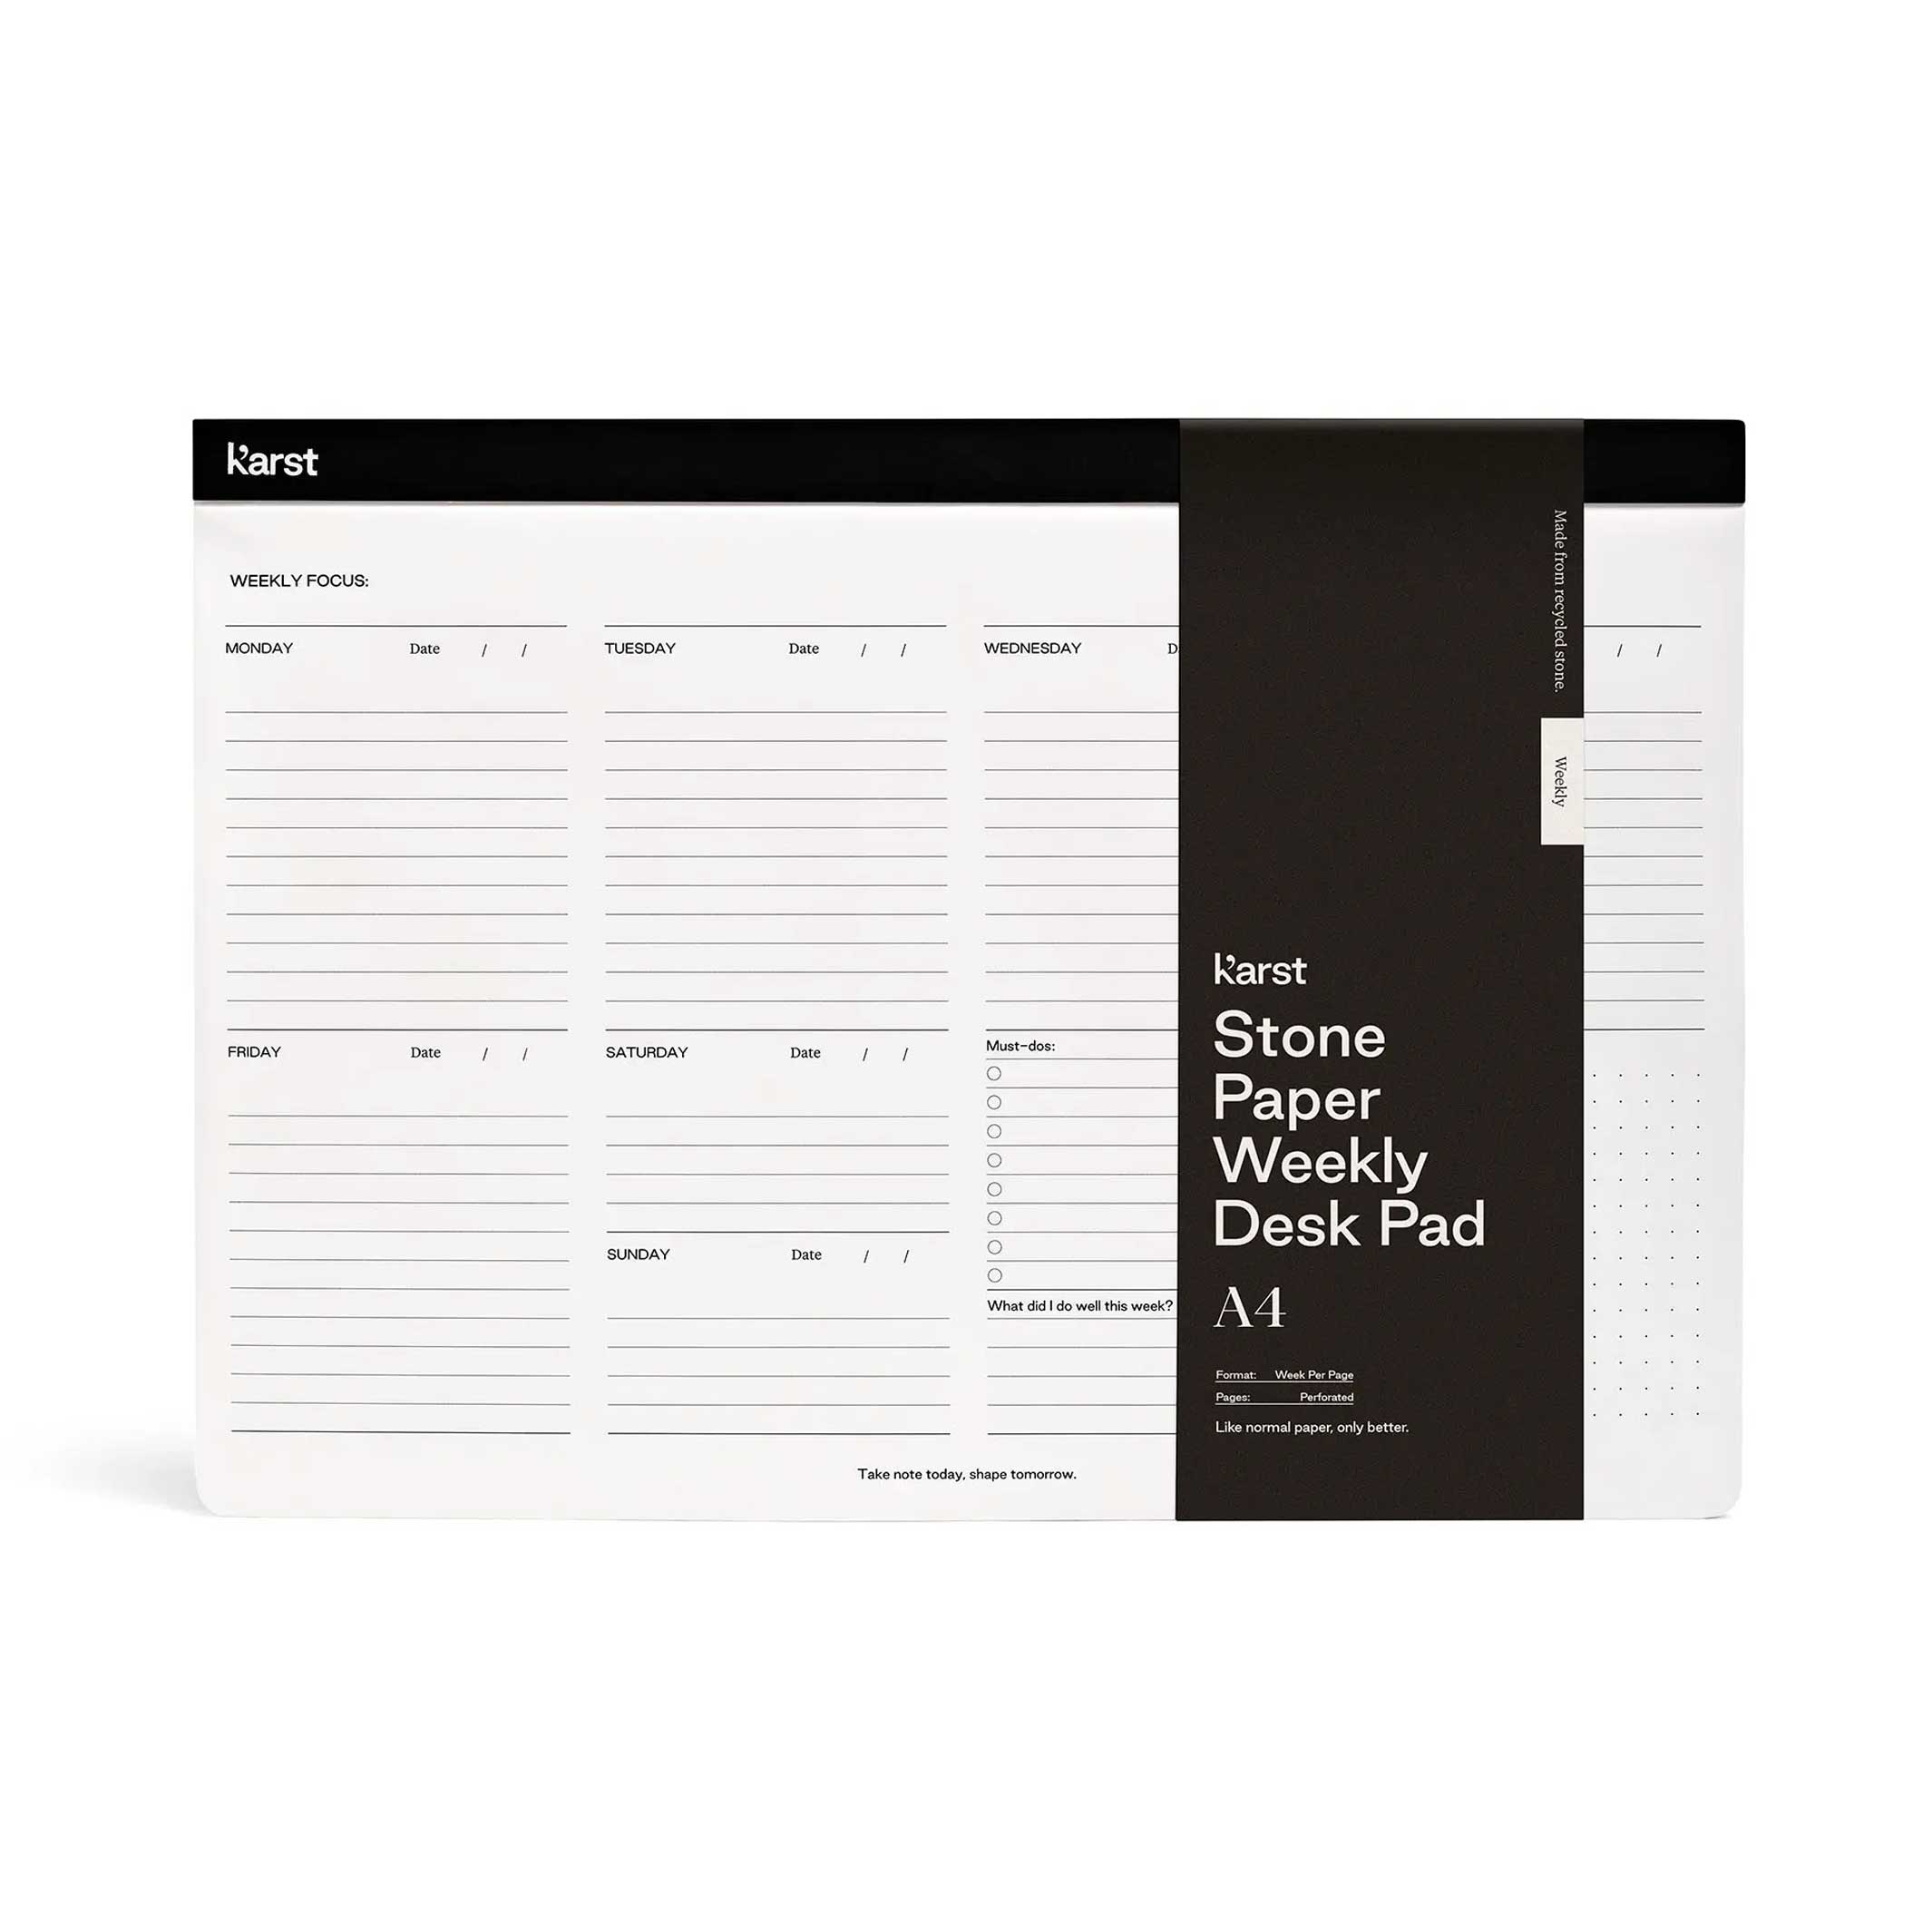 WEEKLY DESK PAD | A4 | Karst Stone Paper